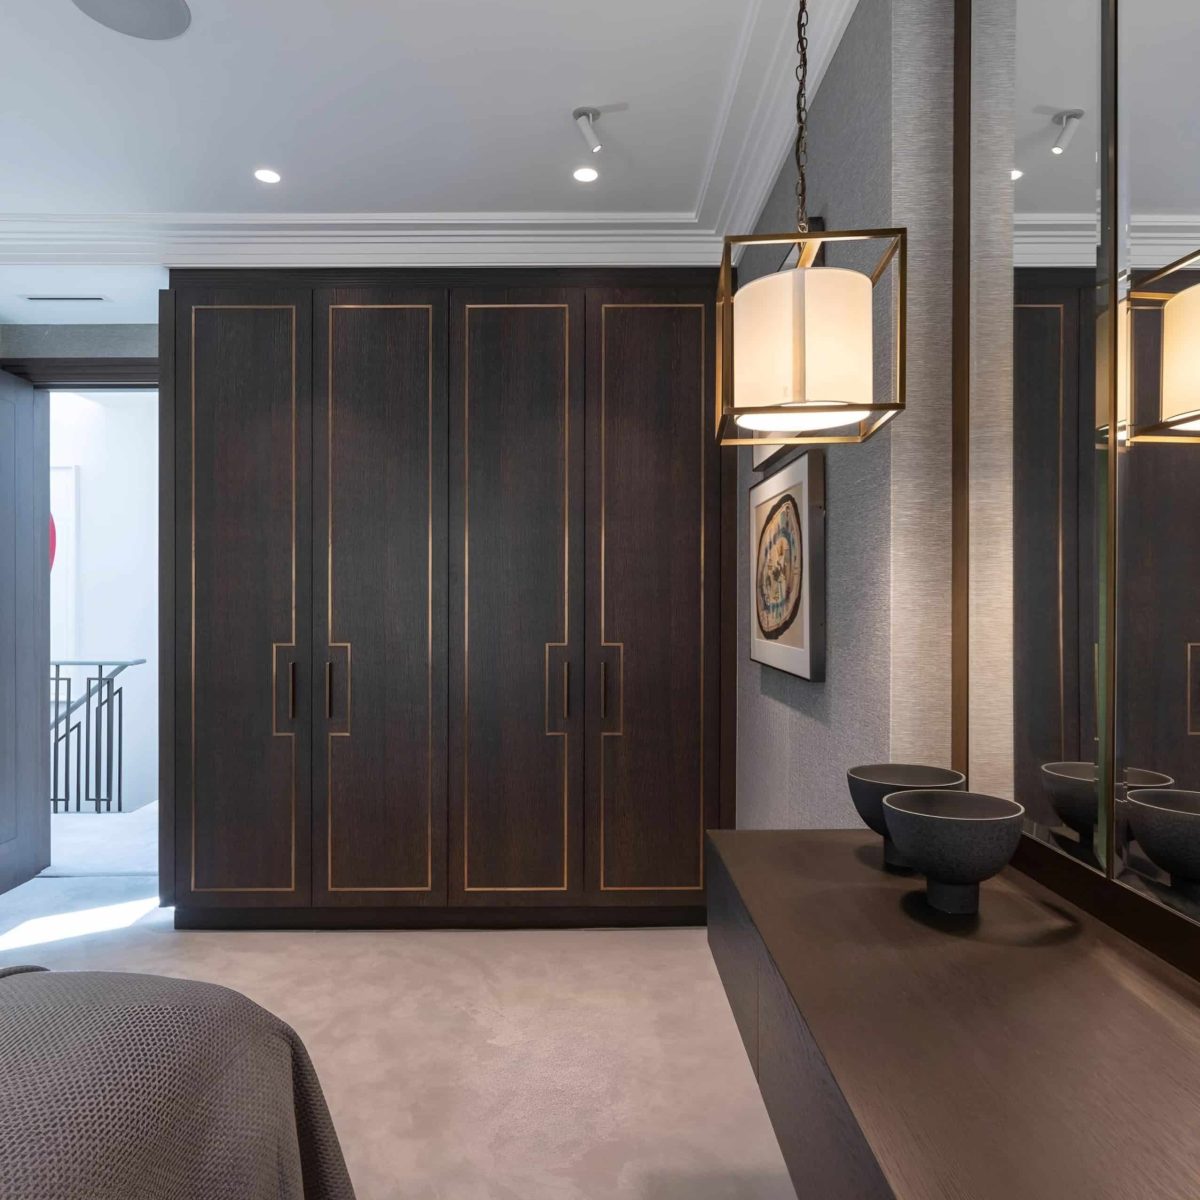 A bedroom in London with bespoke dark wood cabinets and a mirror from Mr Wardrobe.